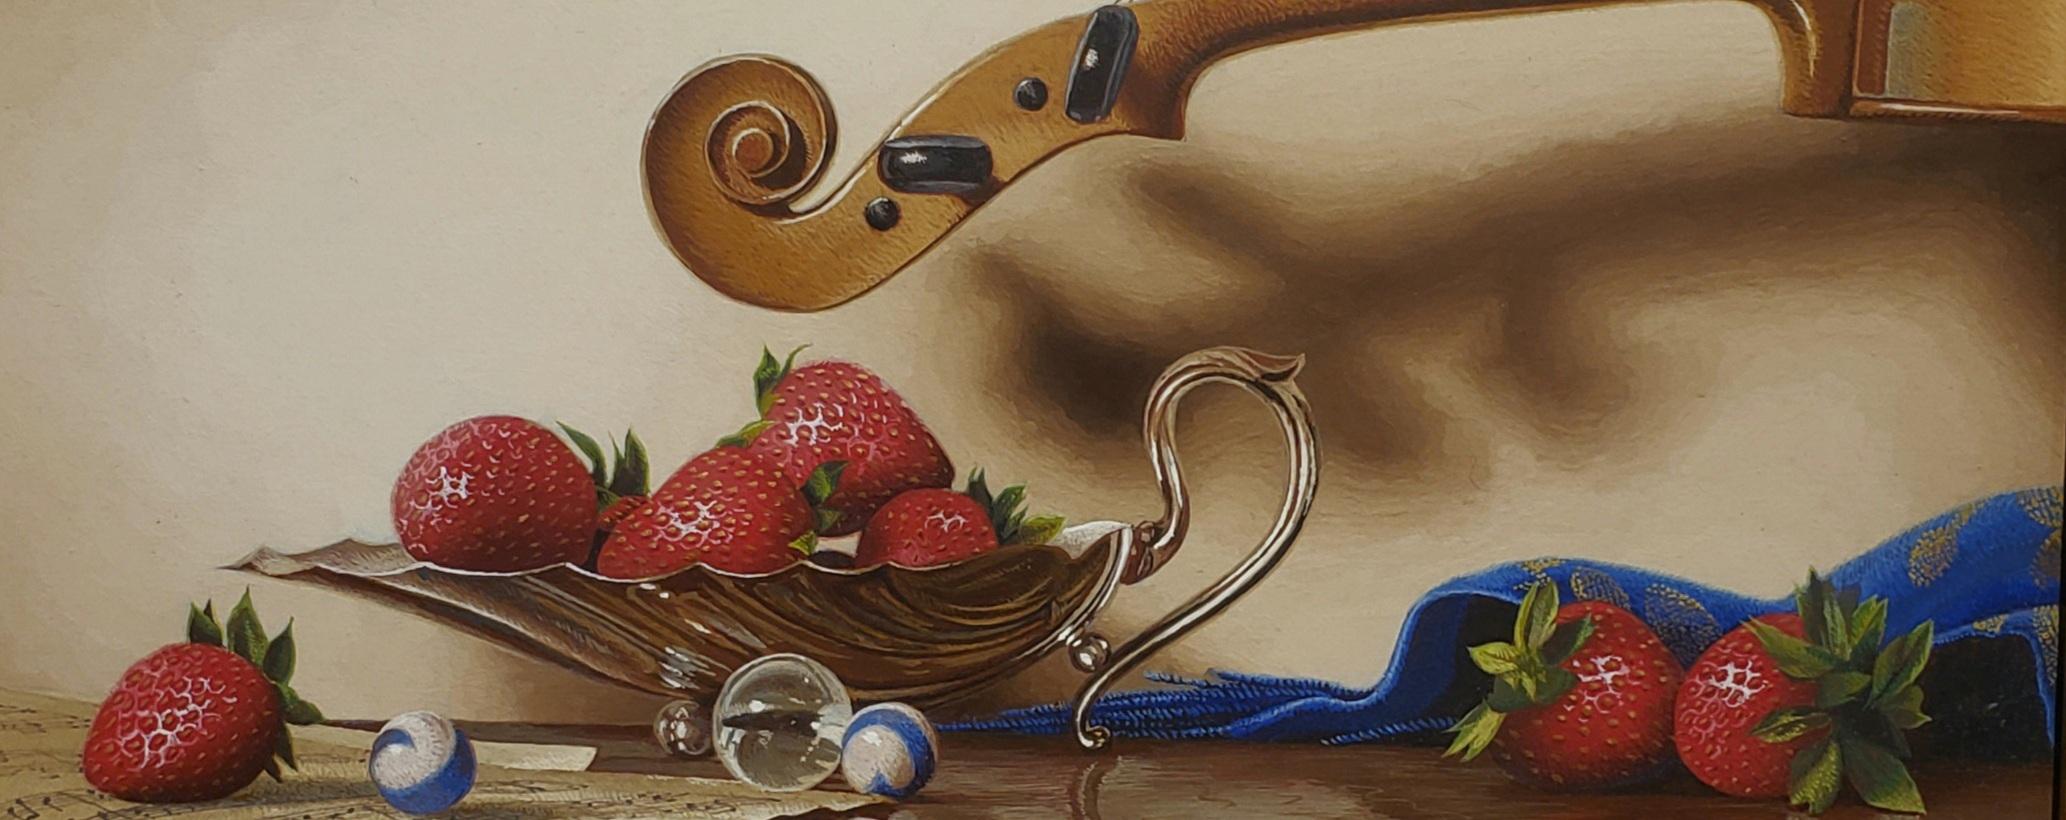  Silver Compote w/Violin, Egg Tempera,  Realism,  3D Appearance, American Artist - Realist Painting by Mark Thompson